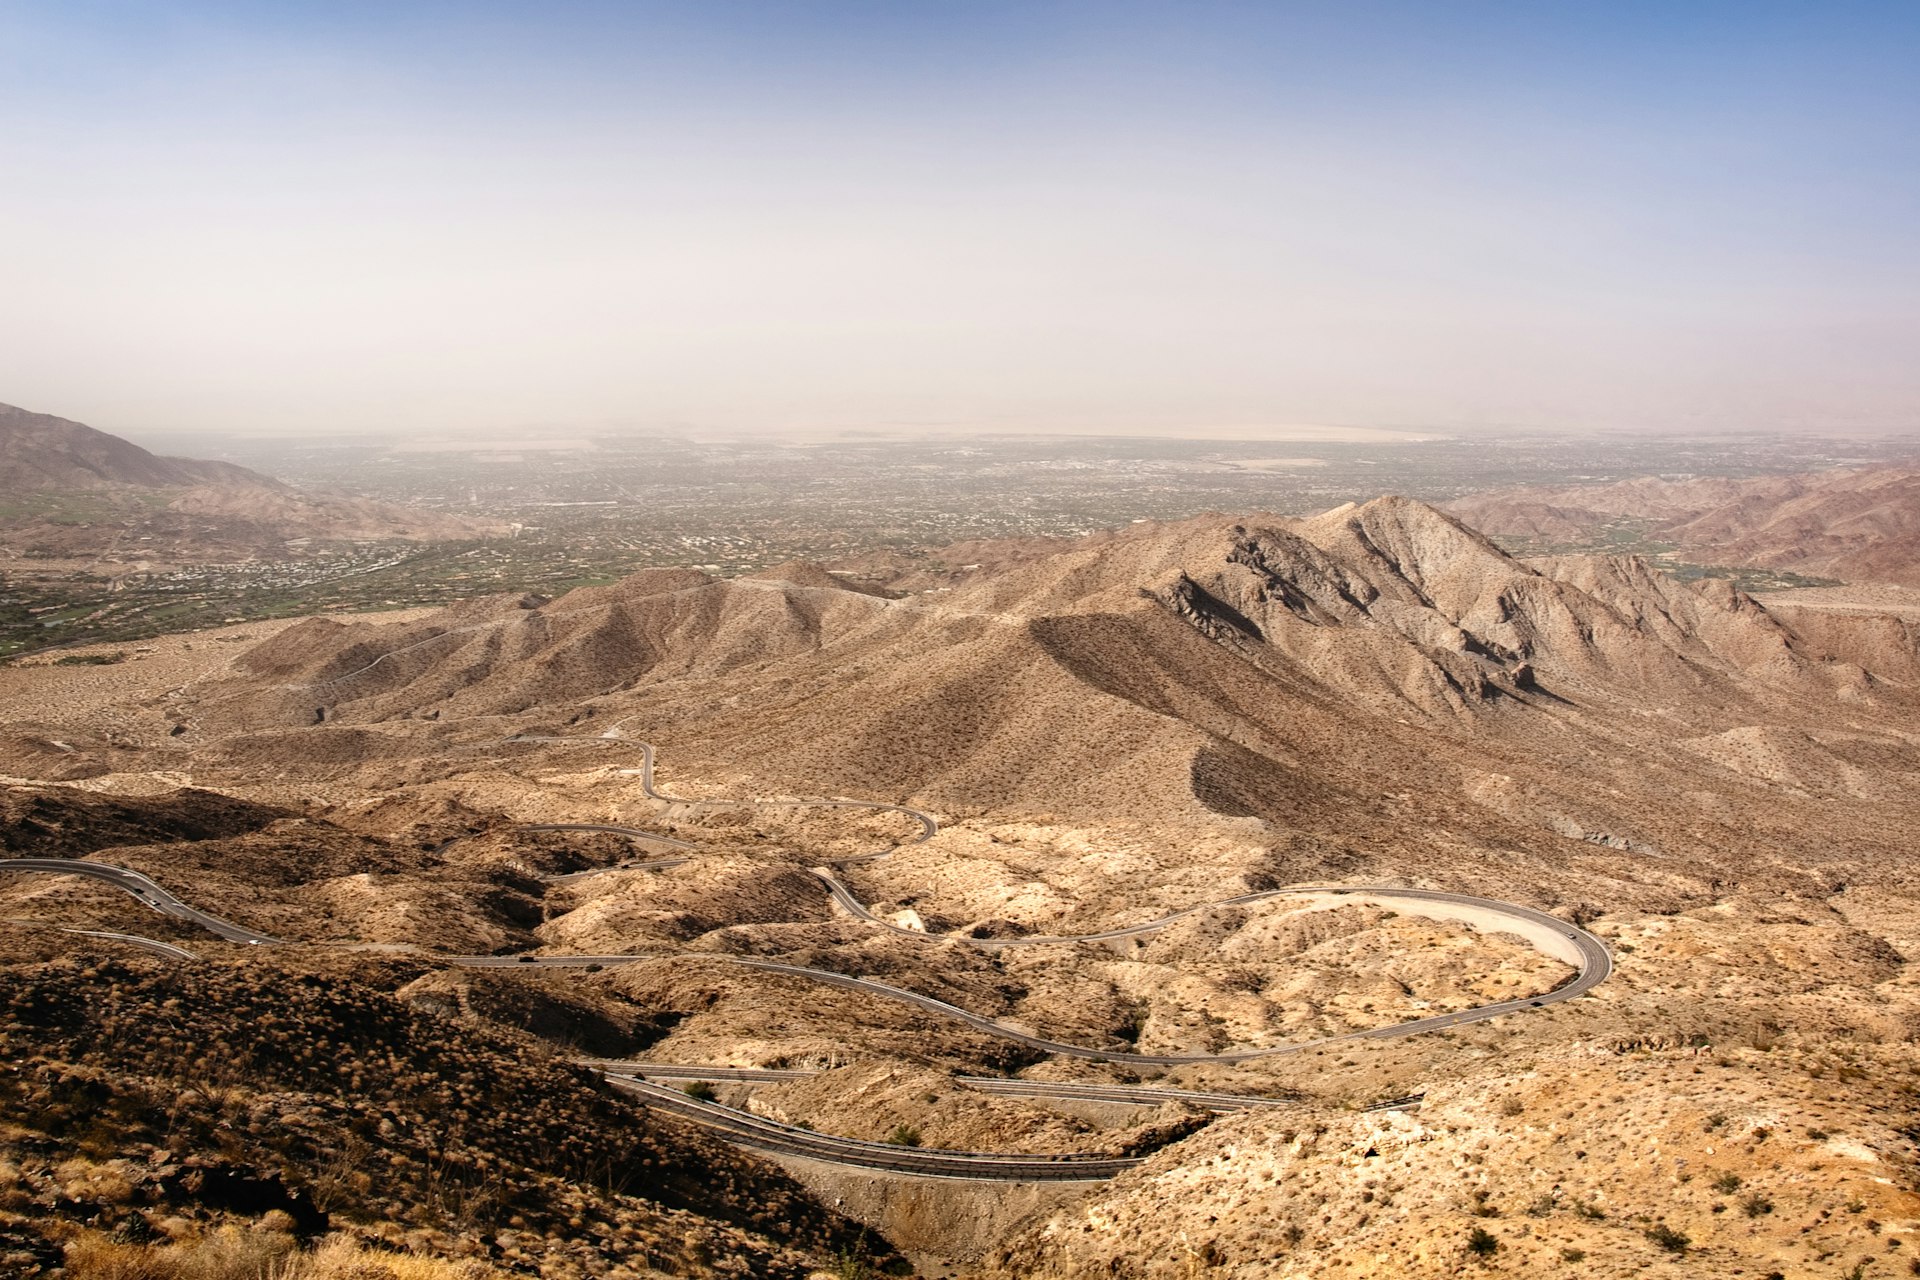 A long road weaves through a mountainous desert landscape with a city in the distance